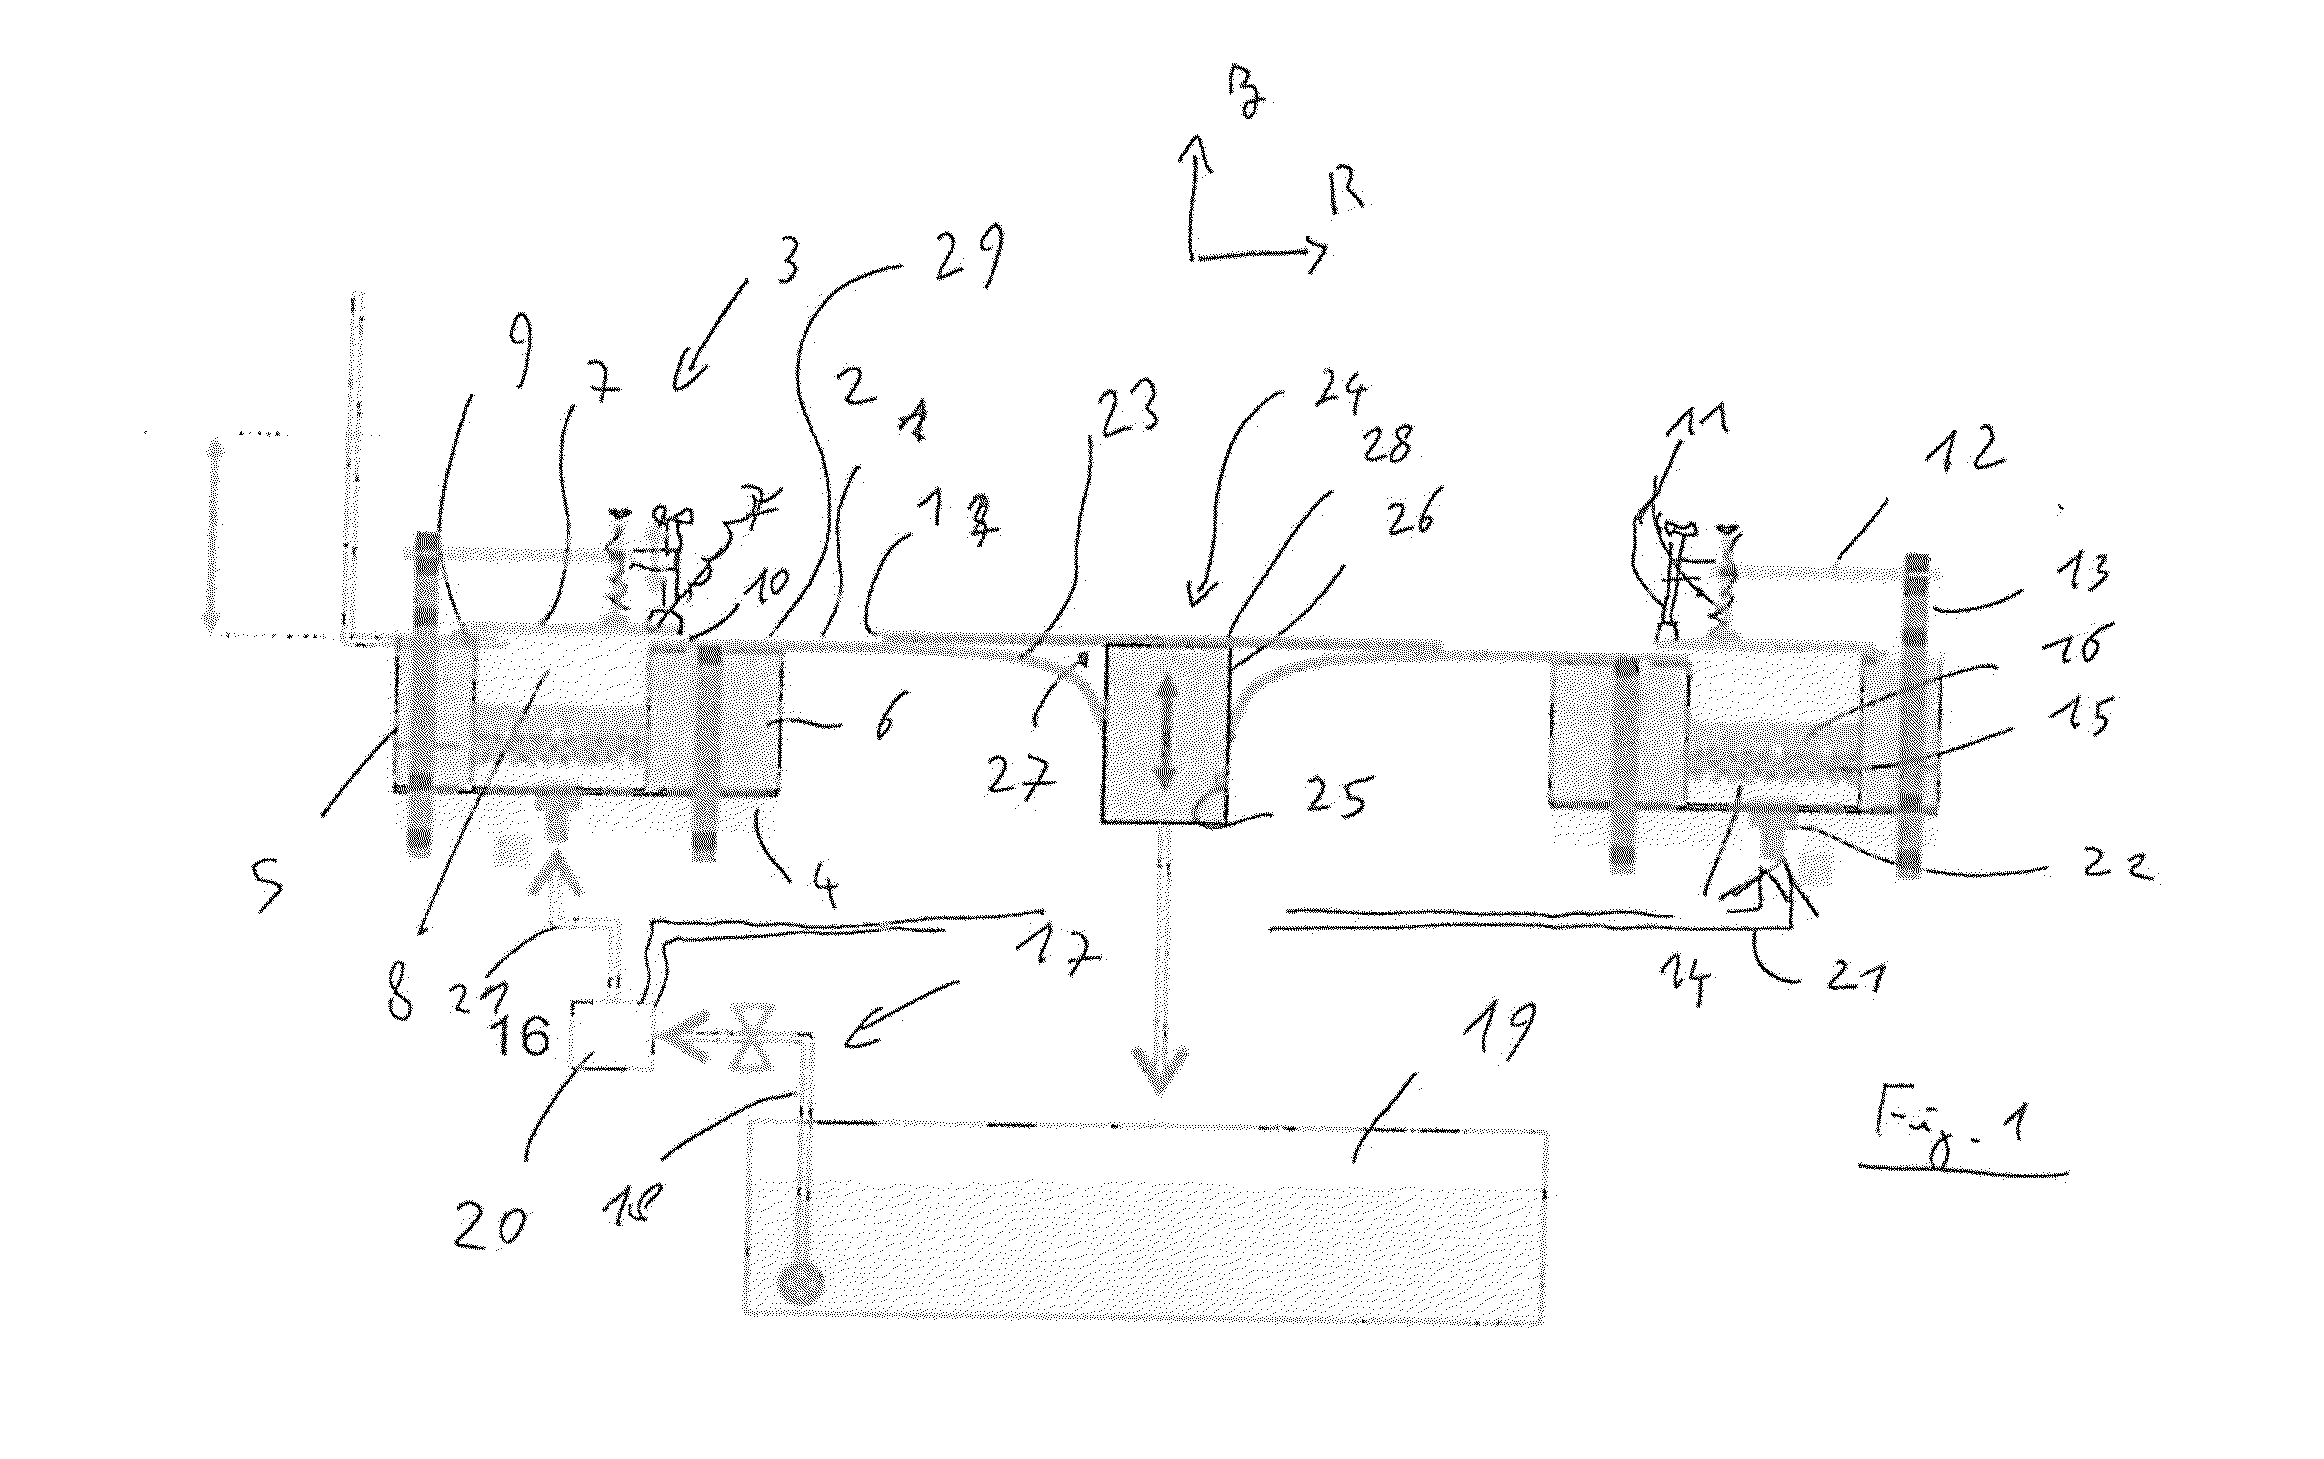 Device and method for creation of a hydraulic jump, notably a fountain or swimming pool